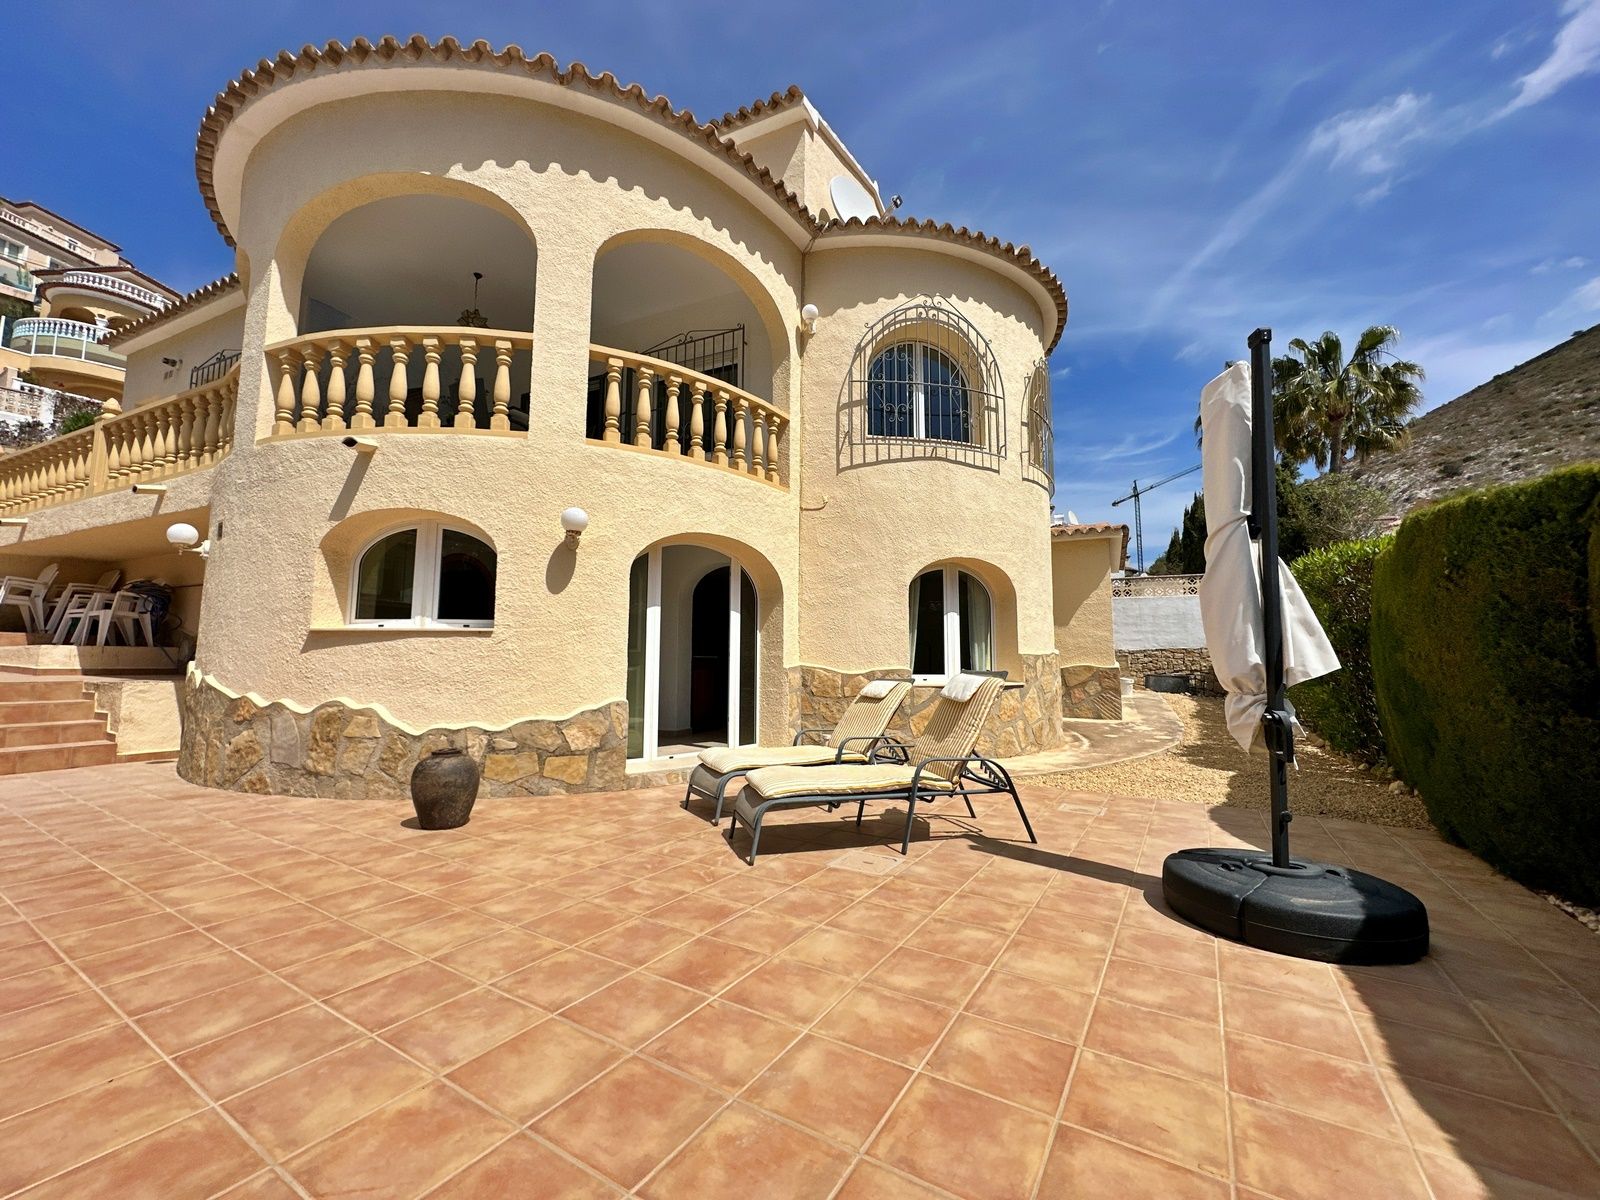 Villa for sale with private pool in Benitachell